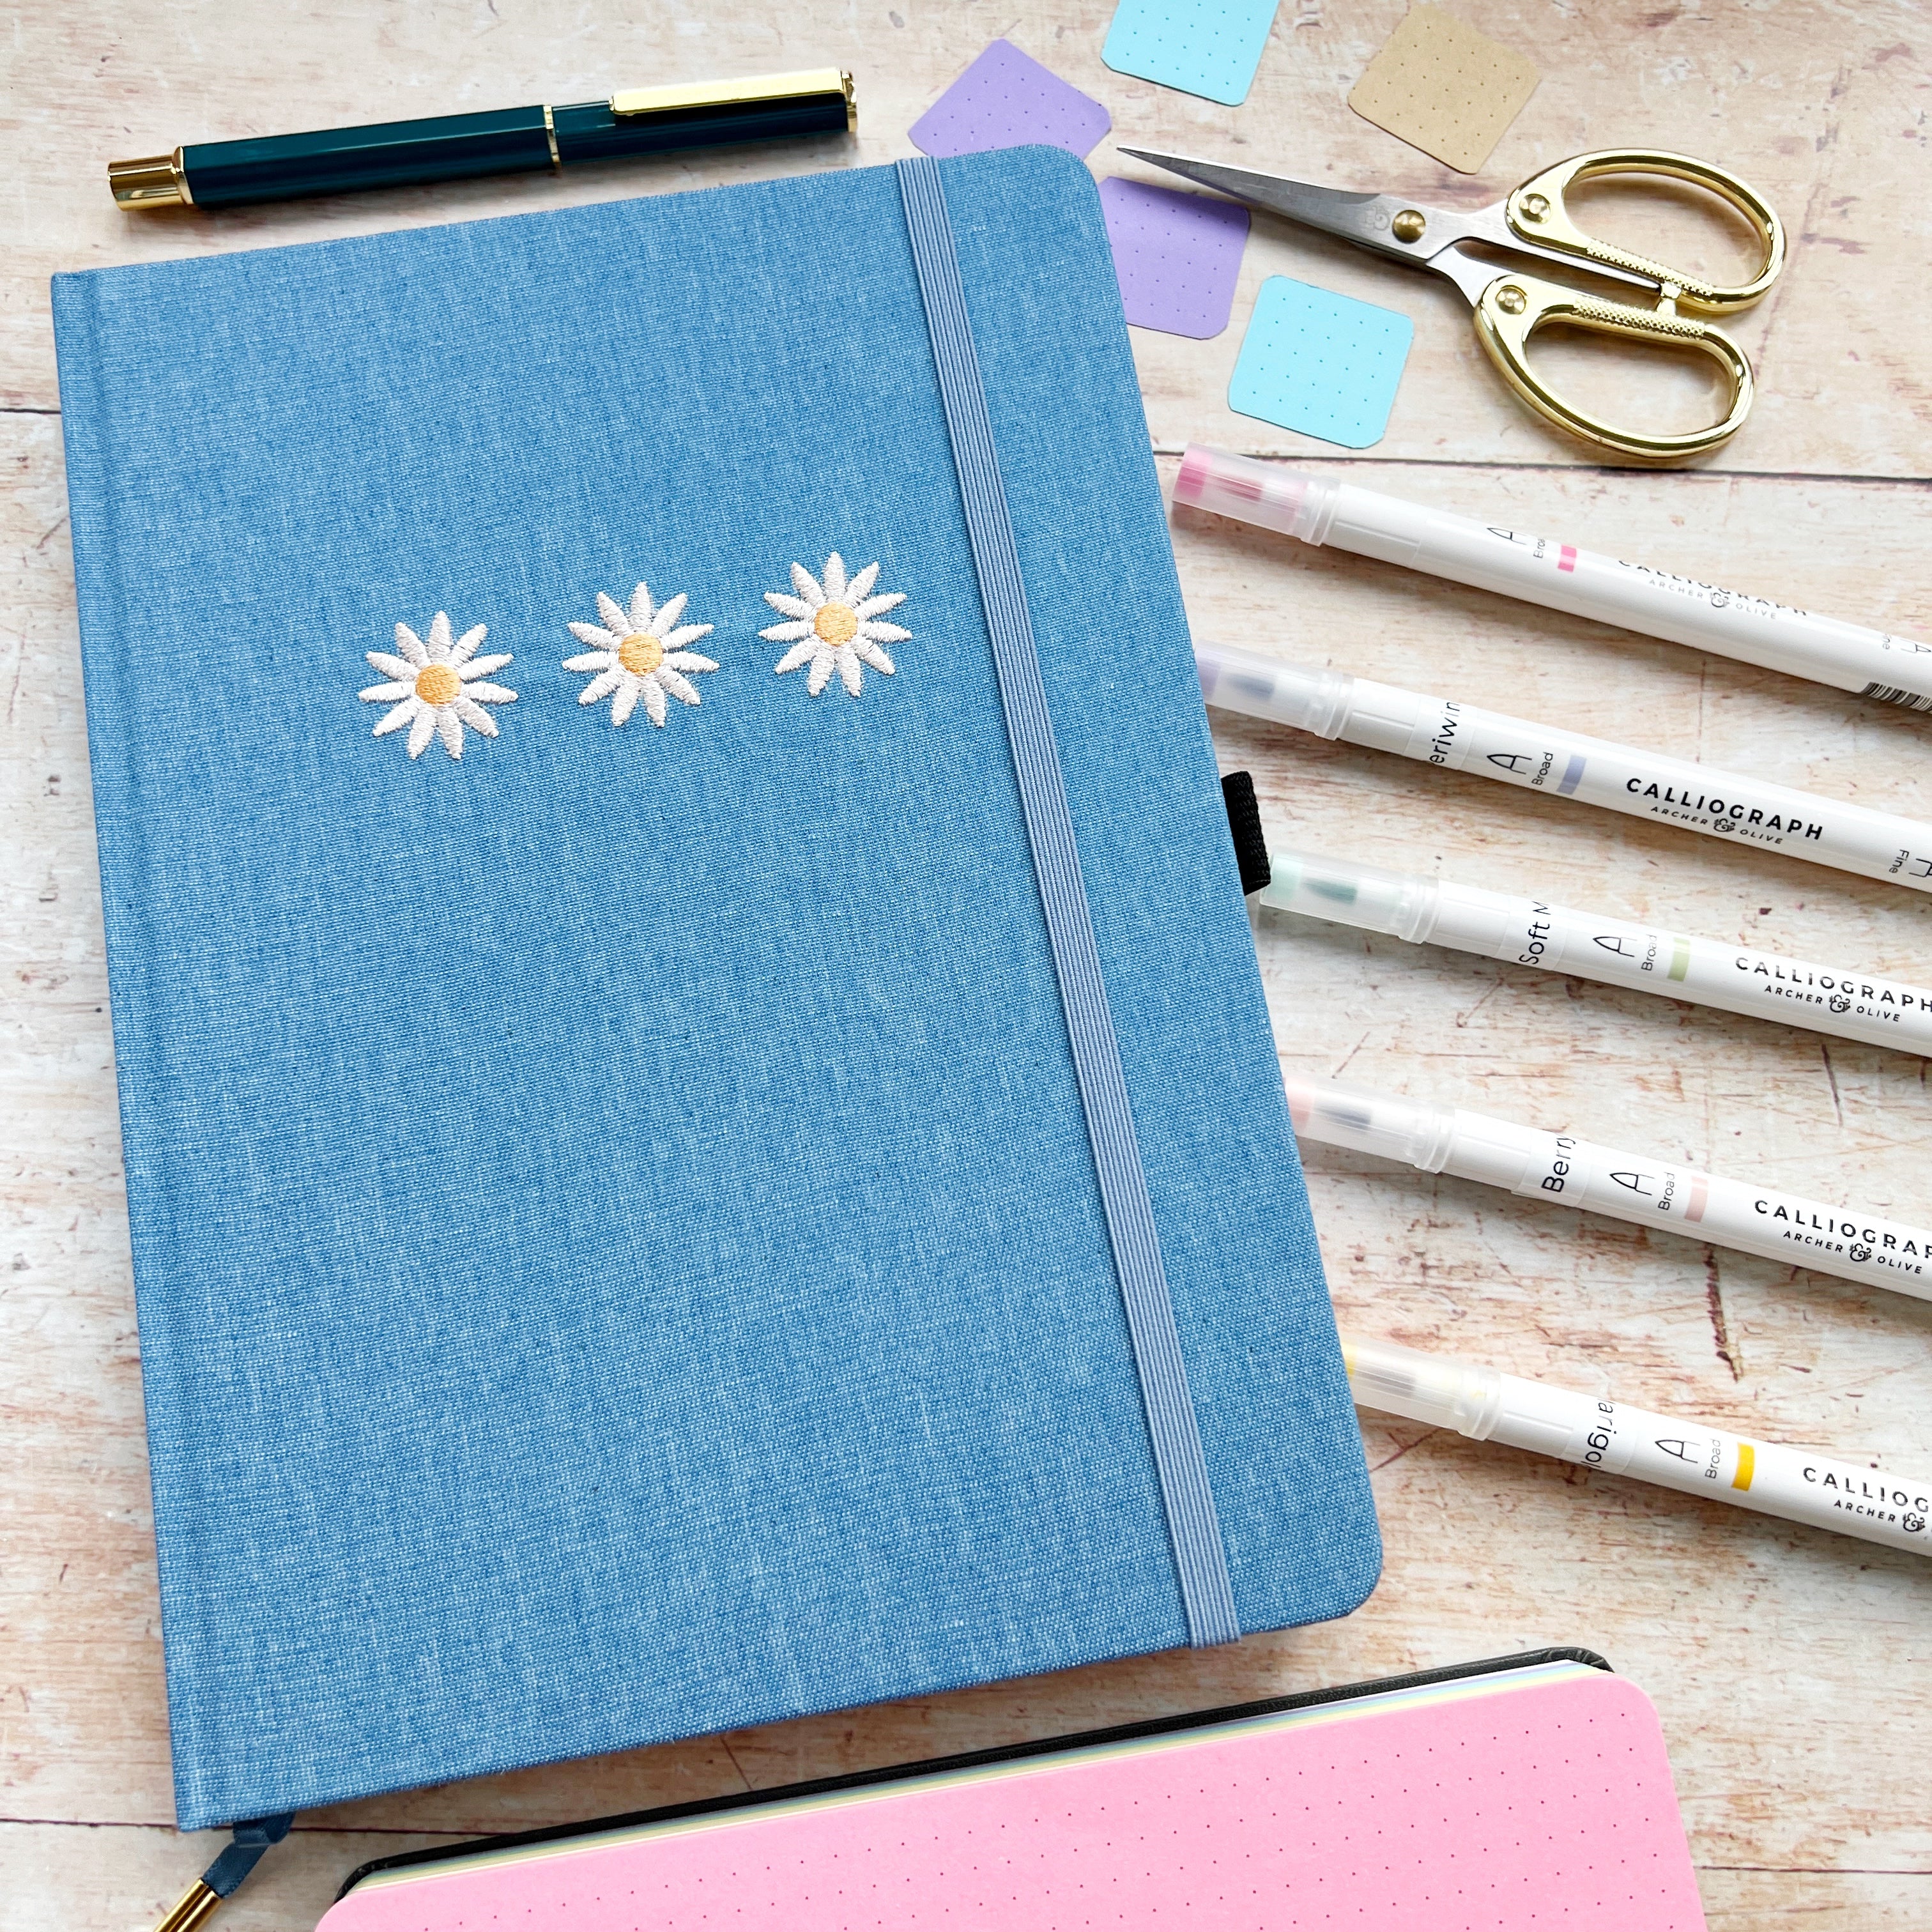 Blue journal with daisies closed and surrounded by pens and accessories